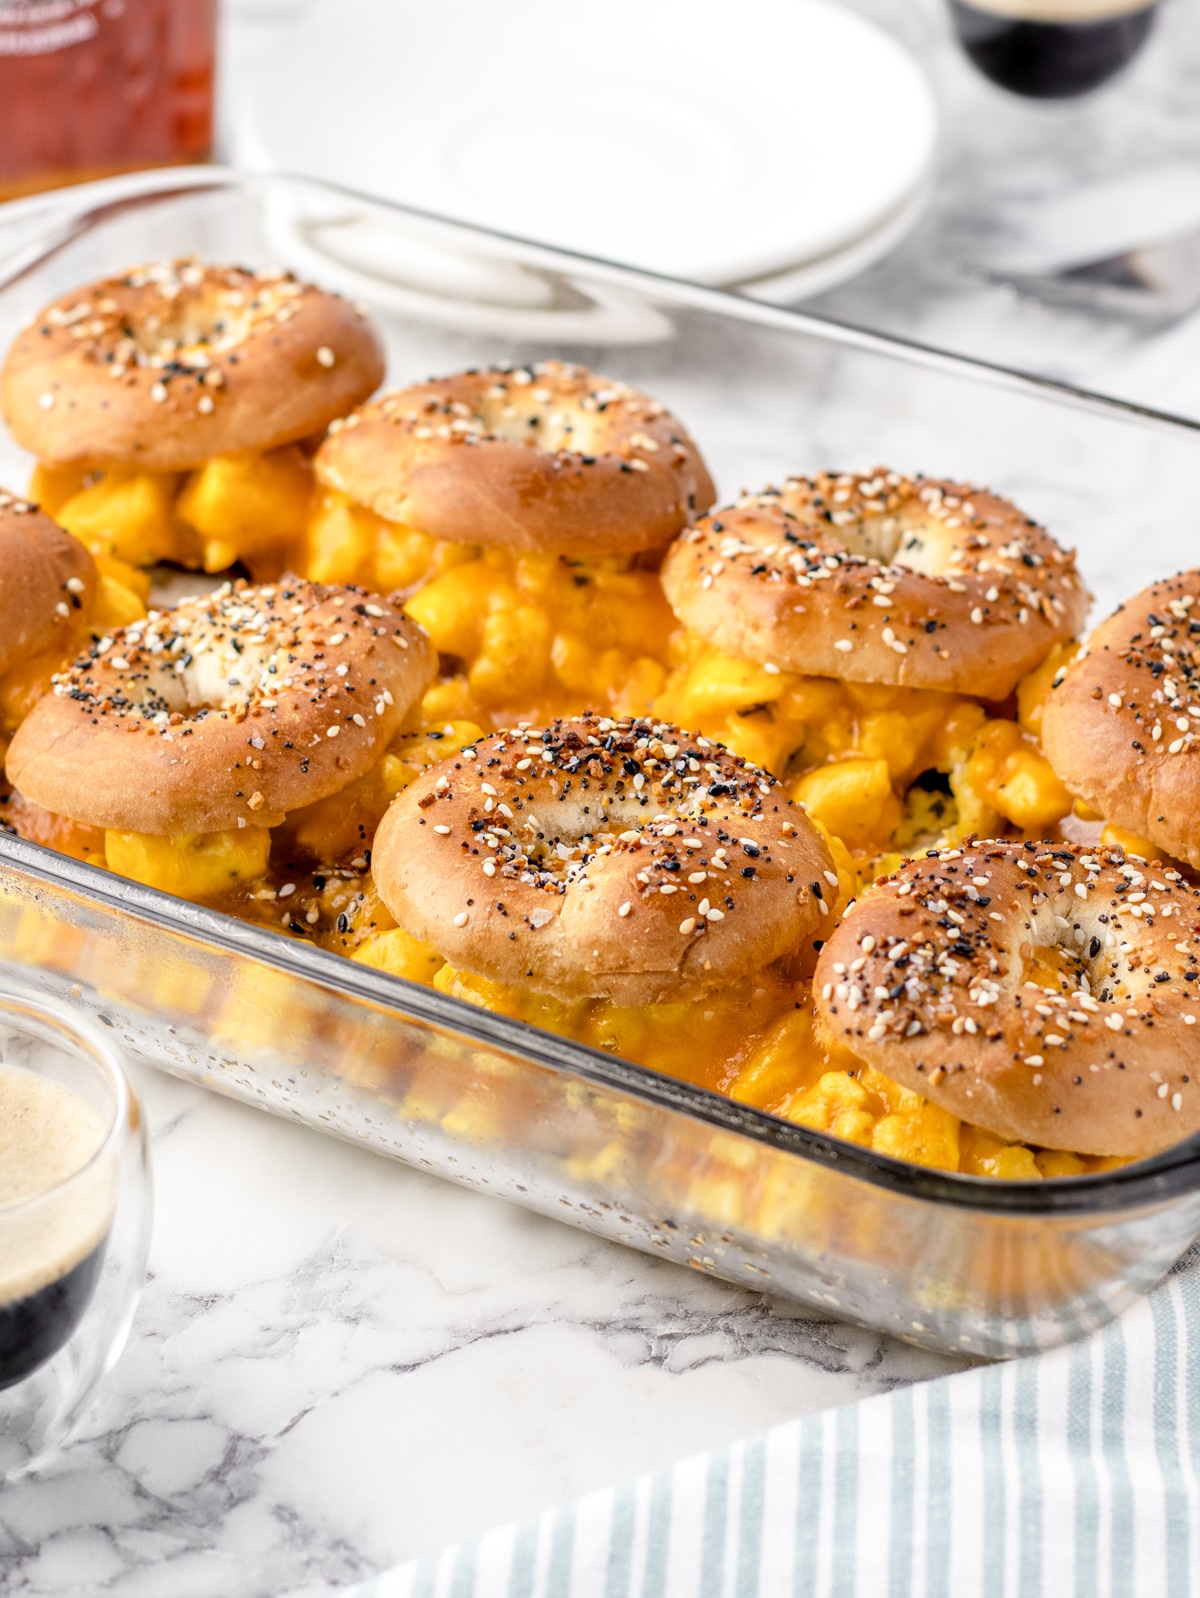 Breakfast Bagel sliders fully baked  with melty cheese and toasted bagels in the pan.